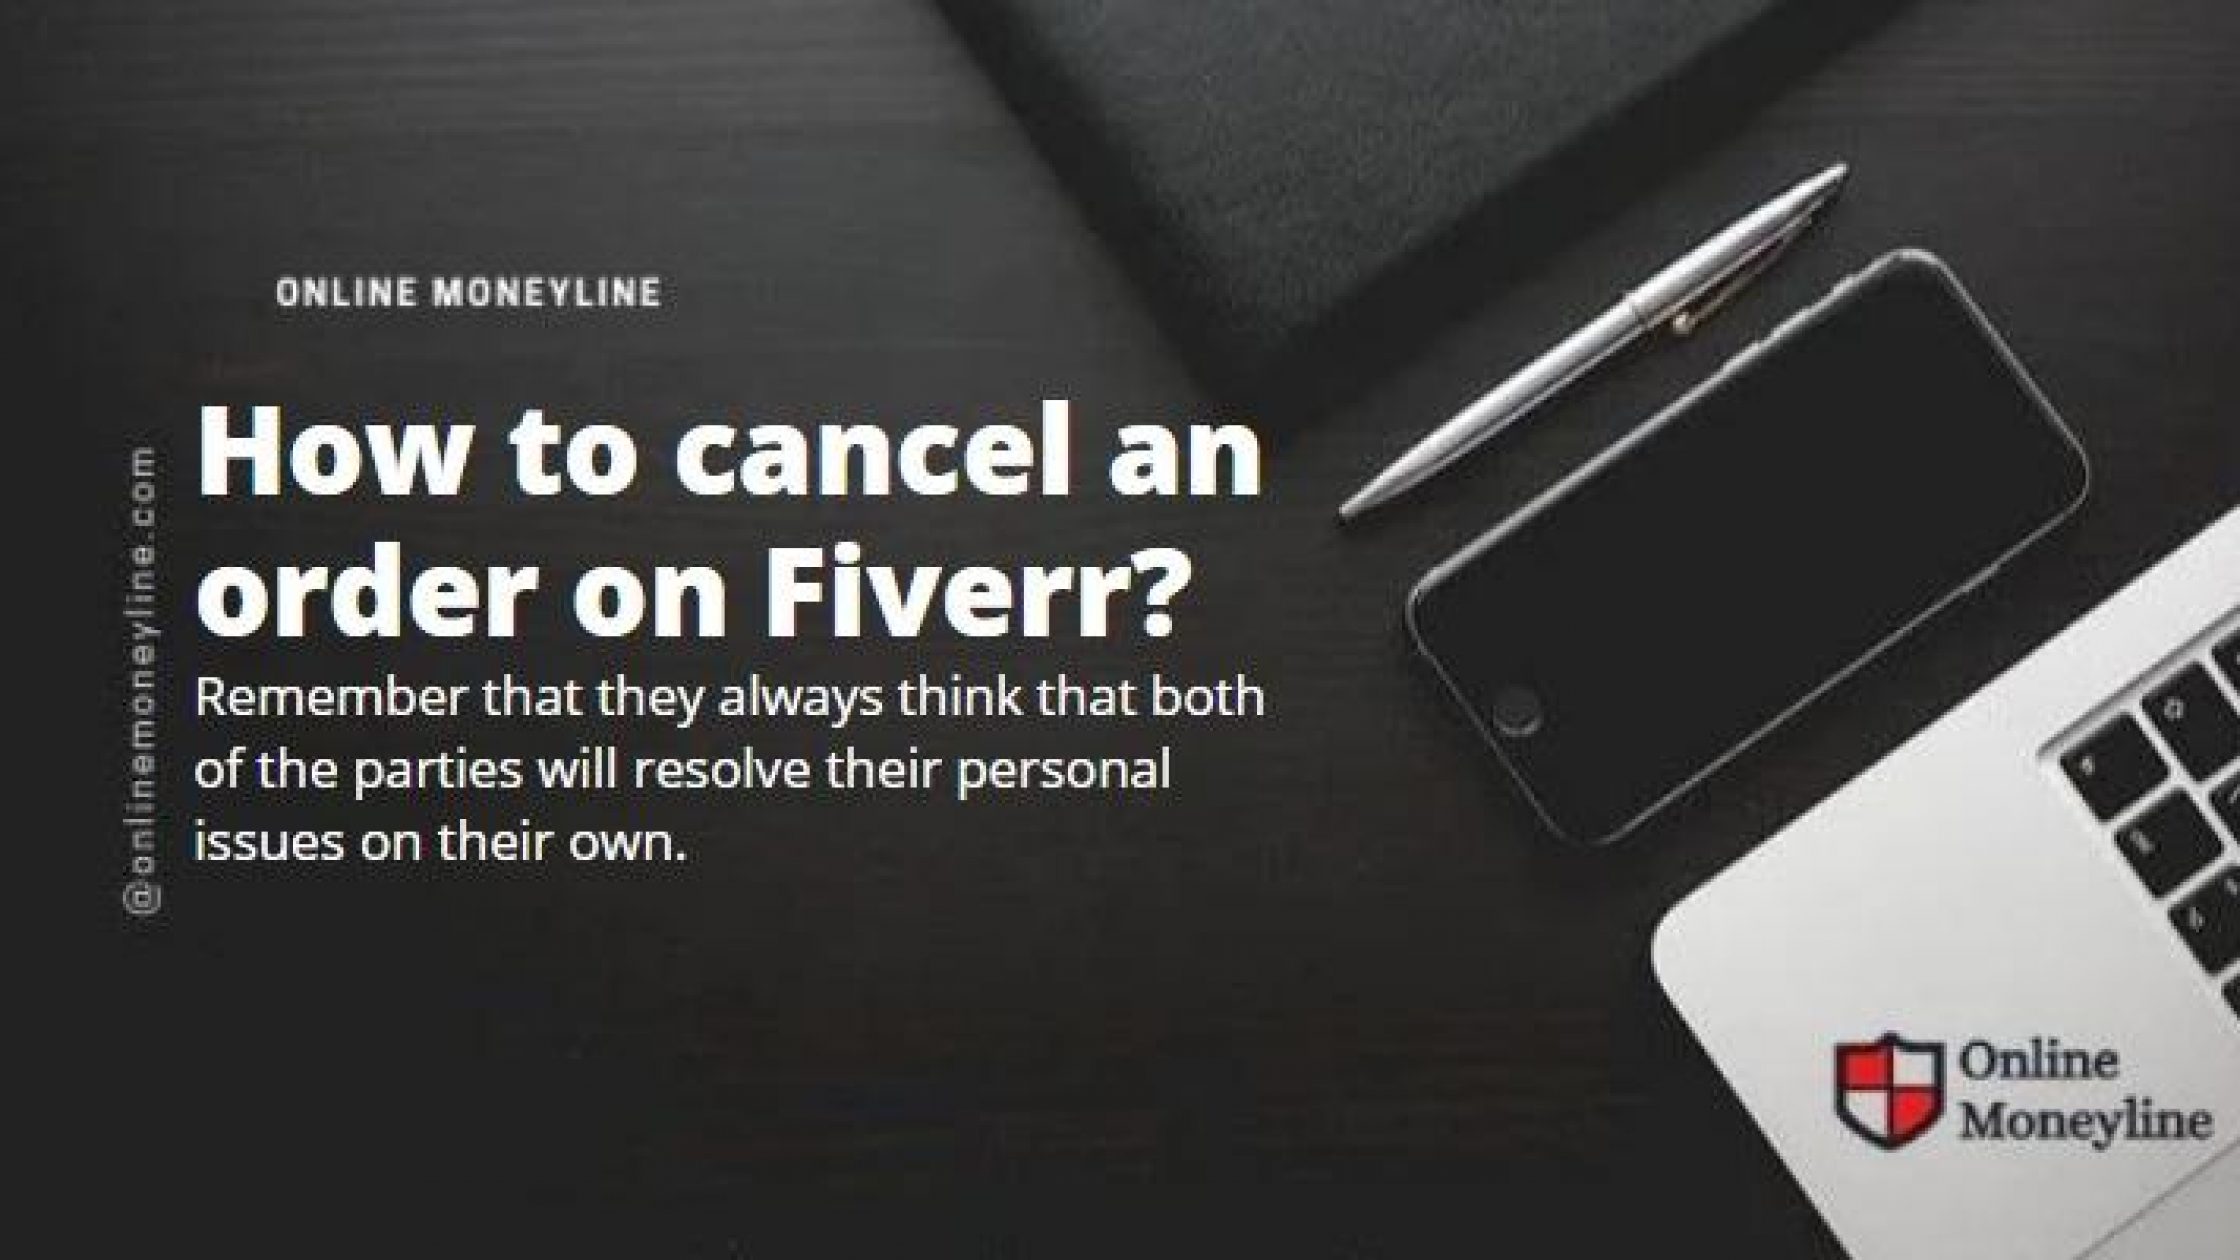 How to cancel an order on Fiverr?